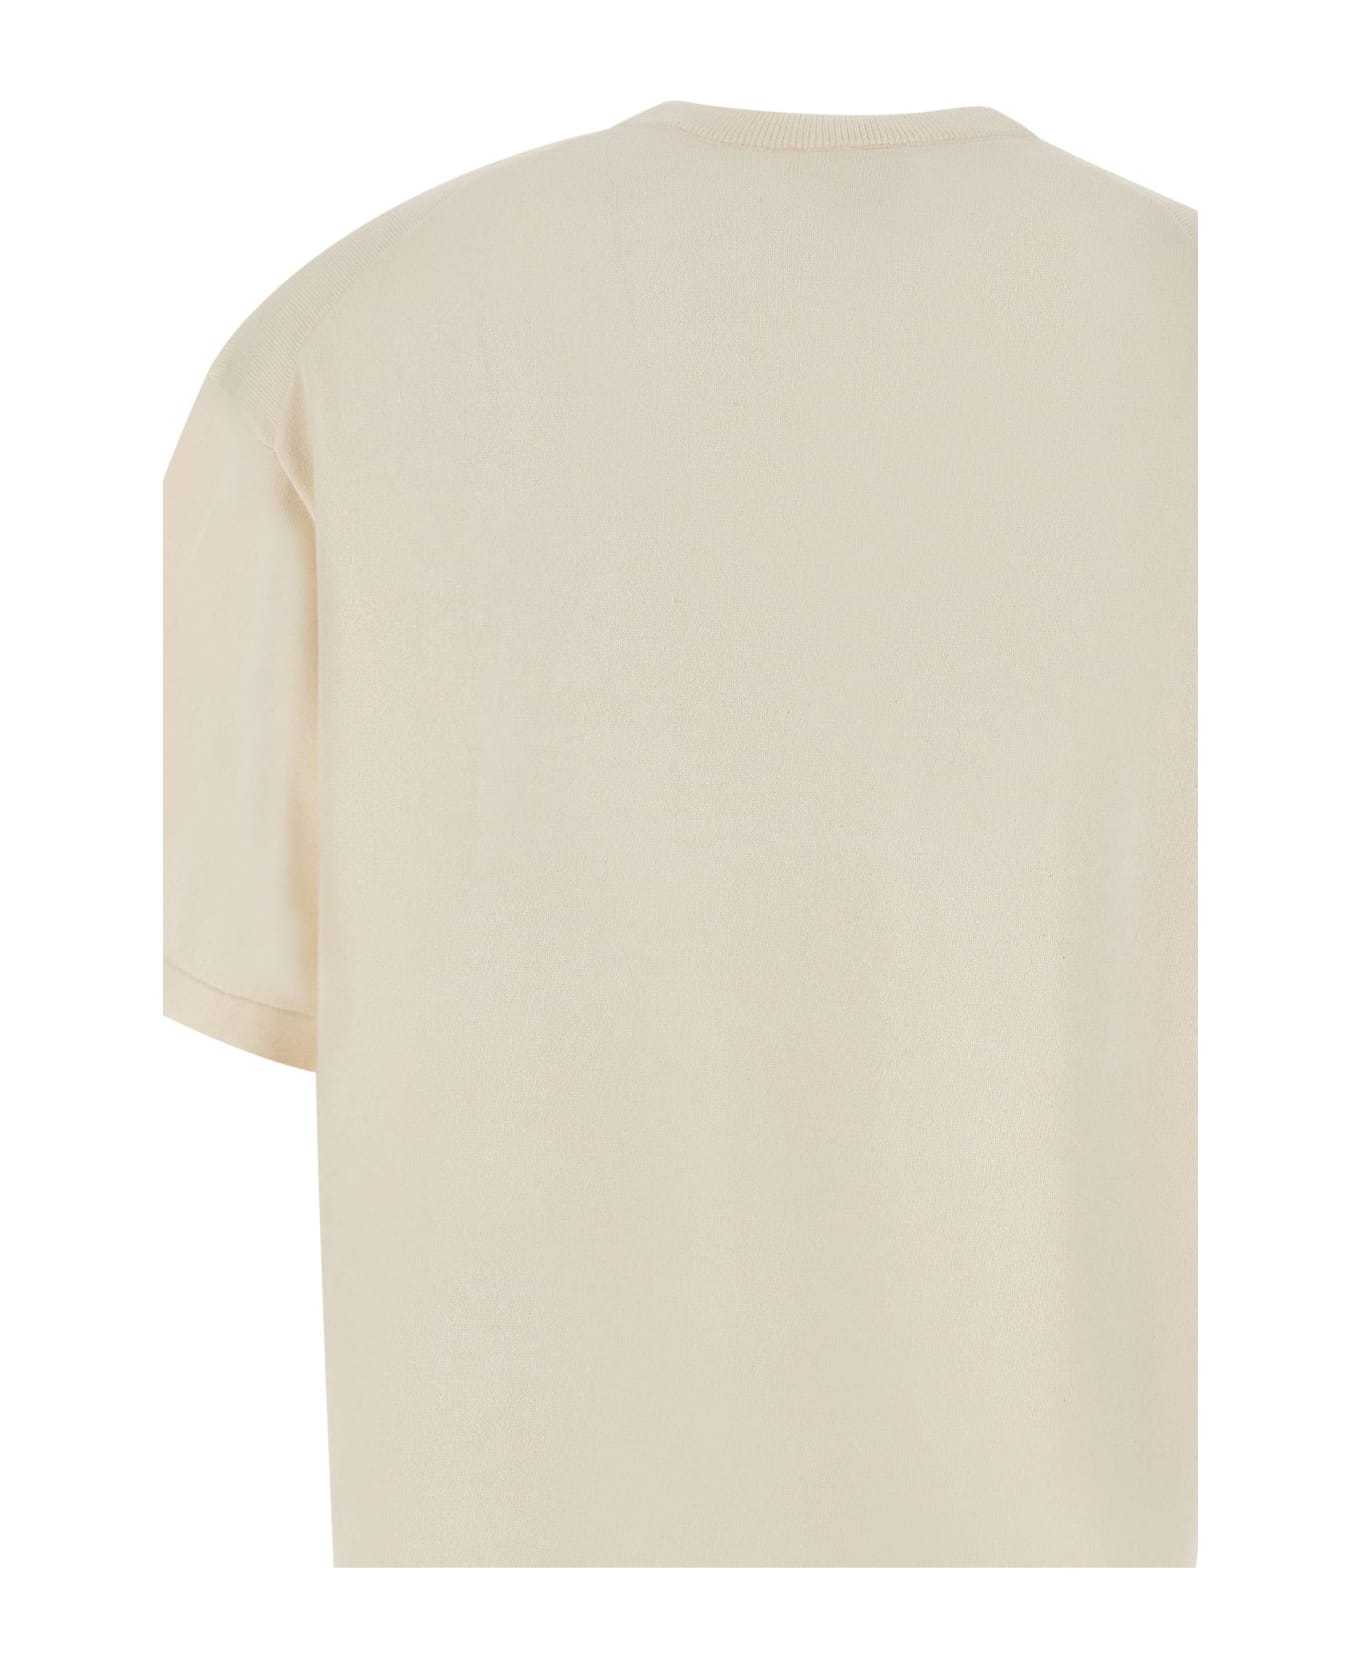 Axel Arigato Cotton And Wool T-shirt - WHITE